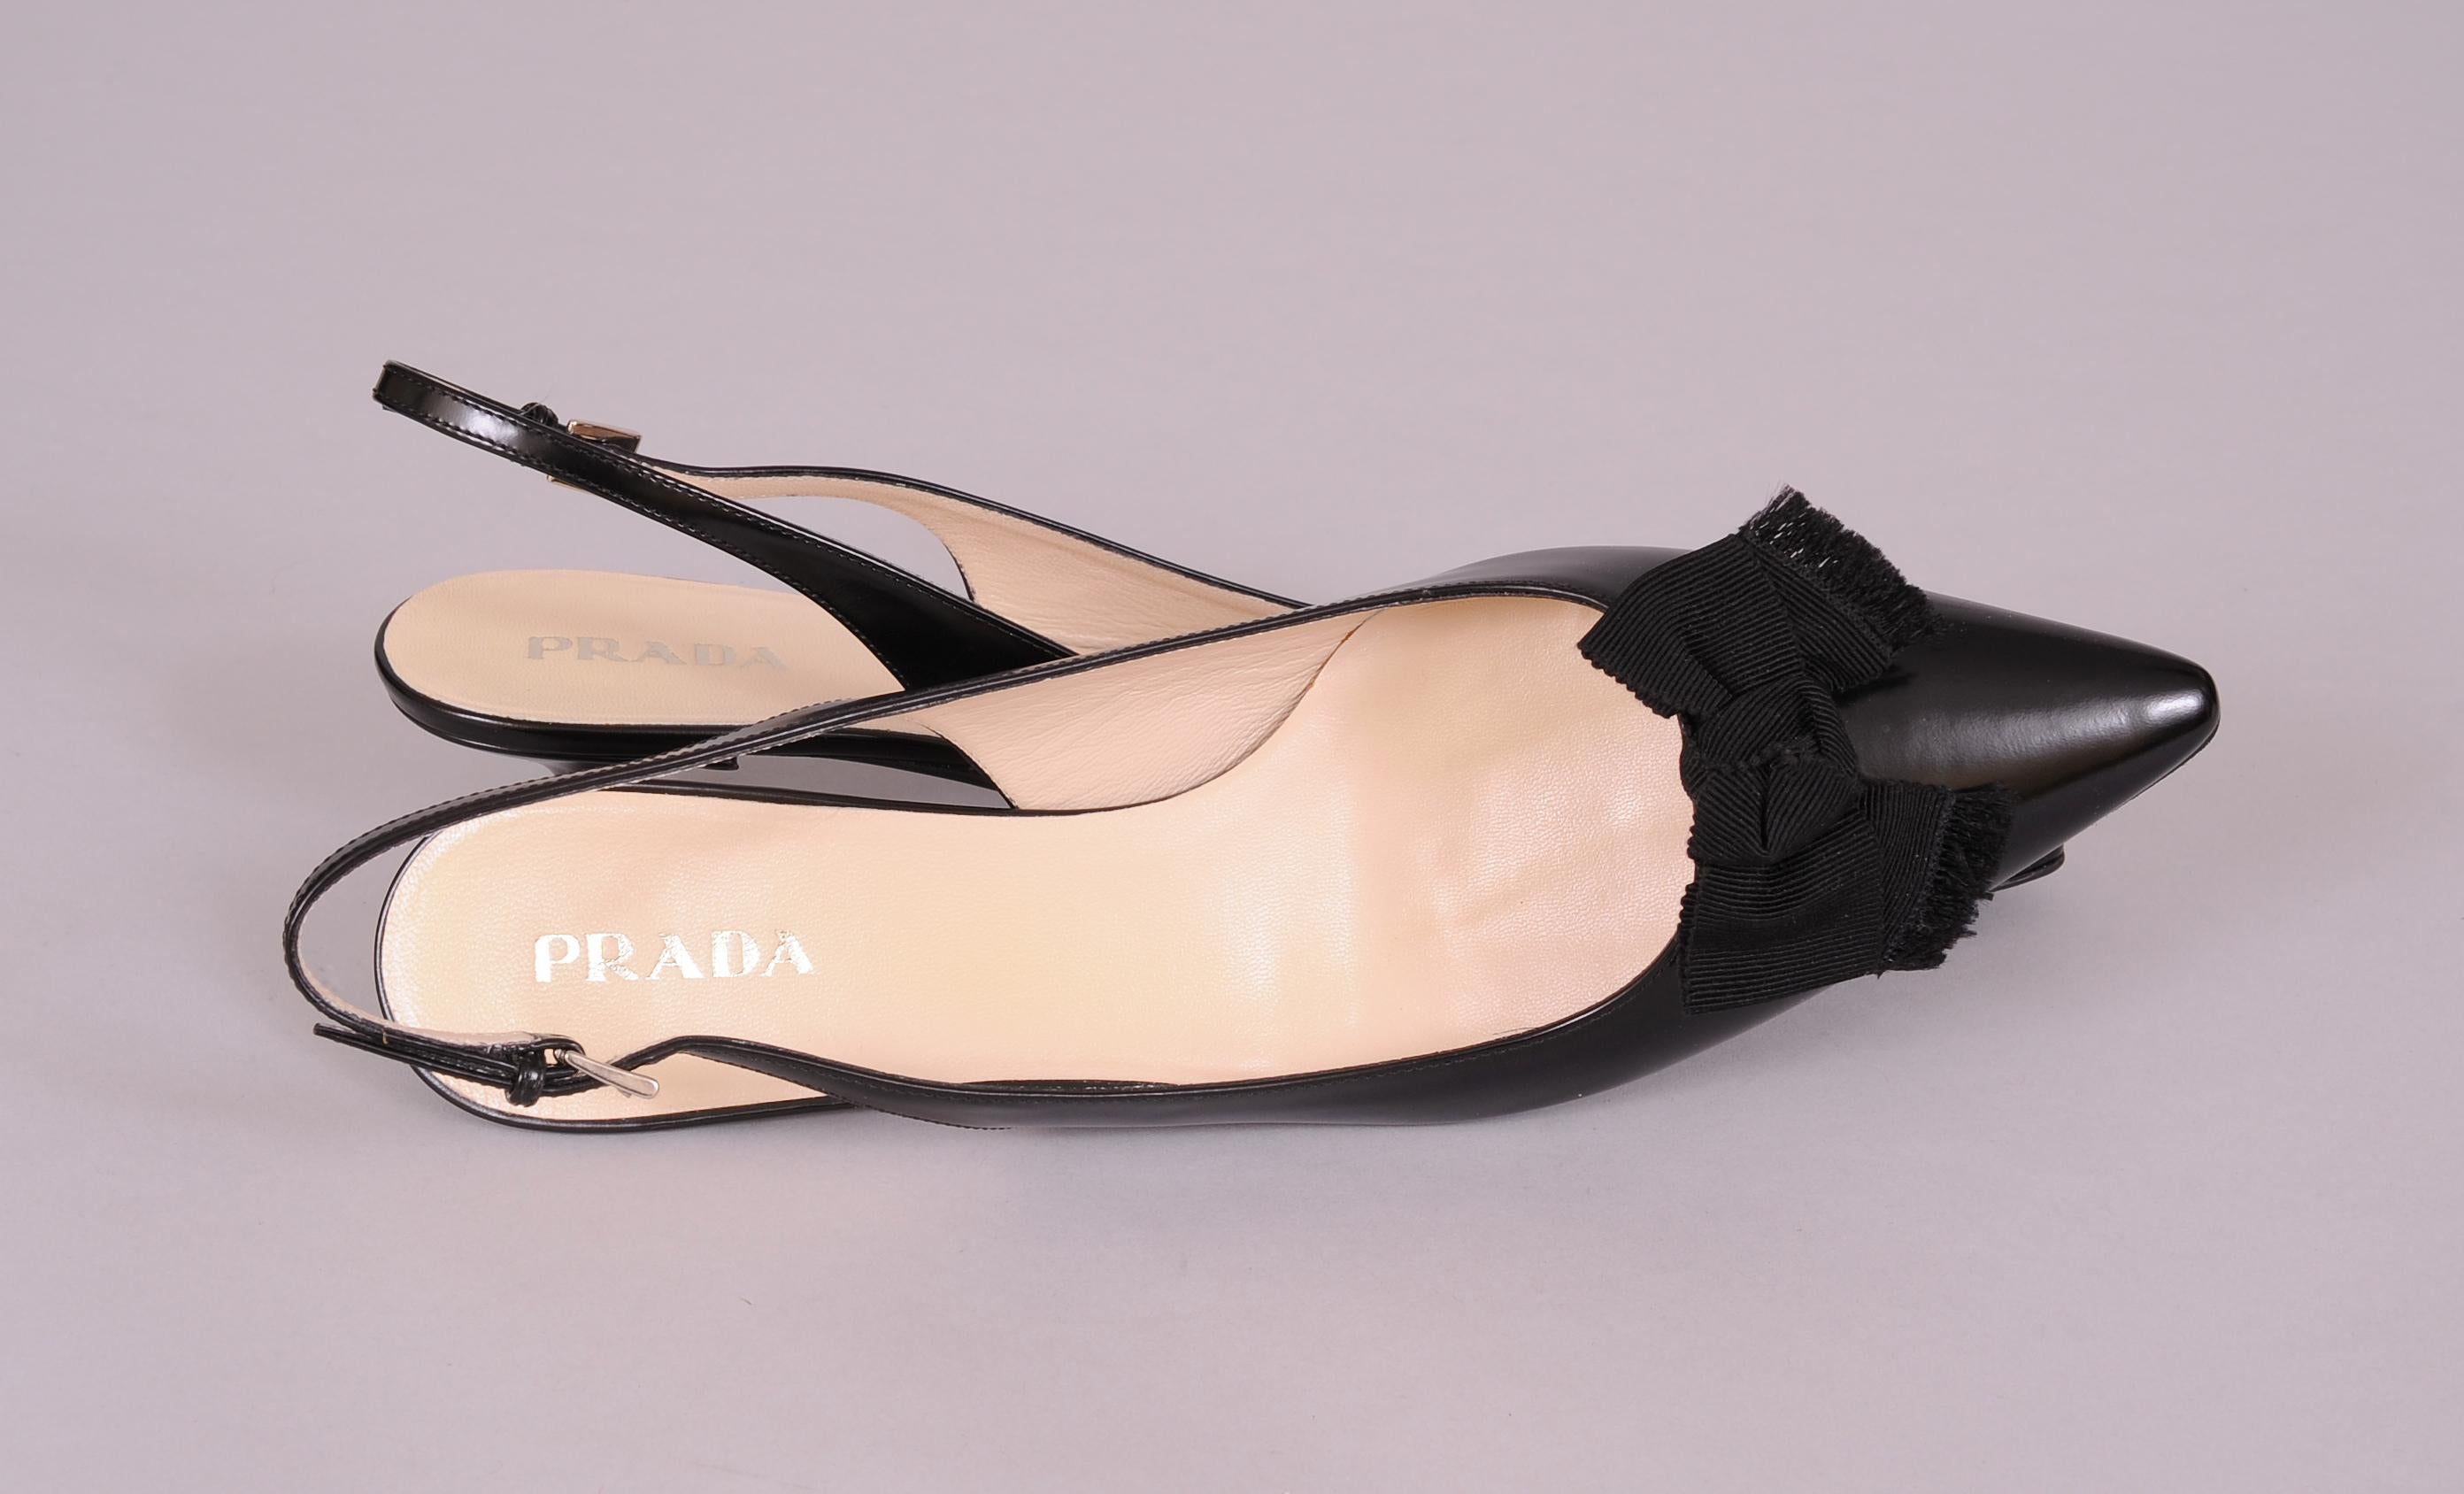 Prada Black Leather Kitten Heel Sling Backs Black Faille Bows Never Worn 10.5 In New Condition In New Hope, PA